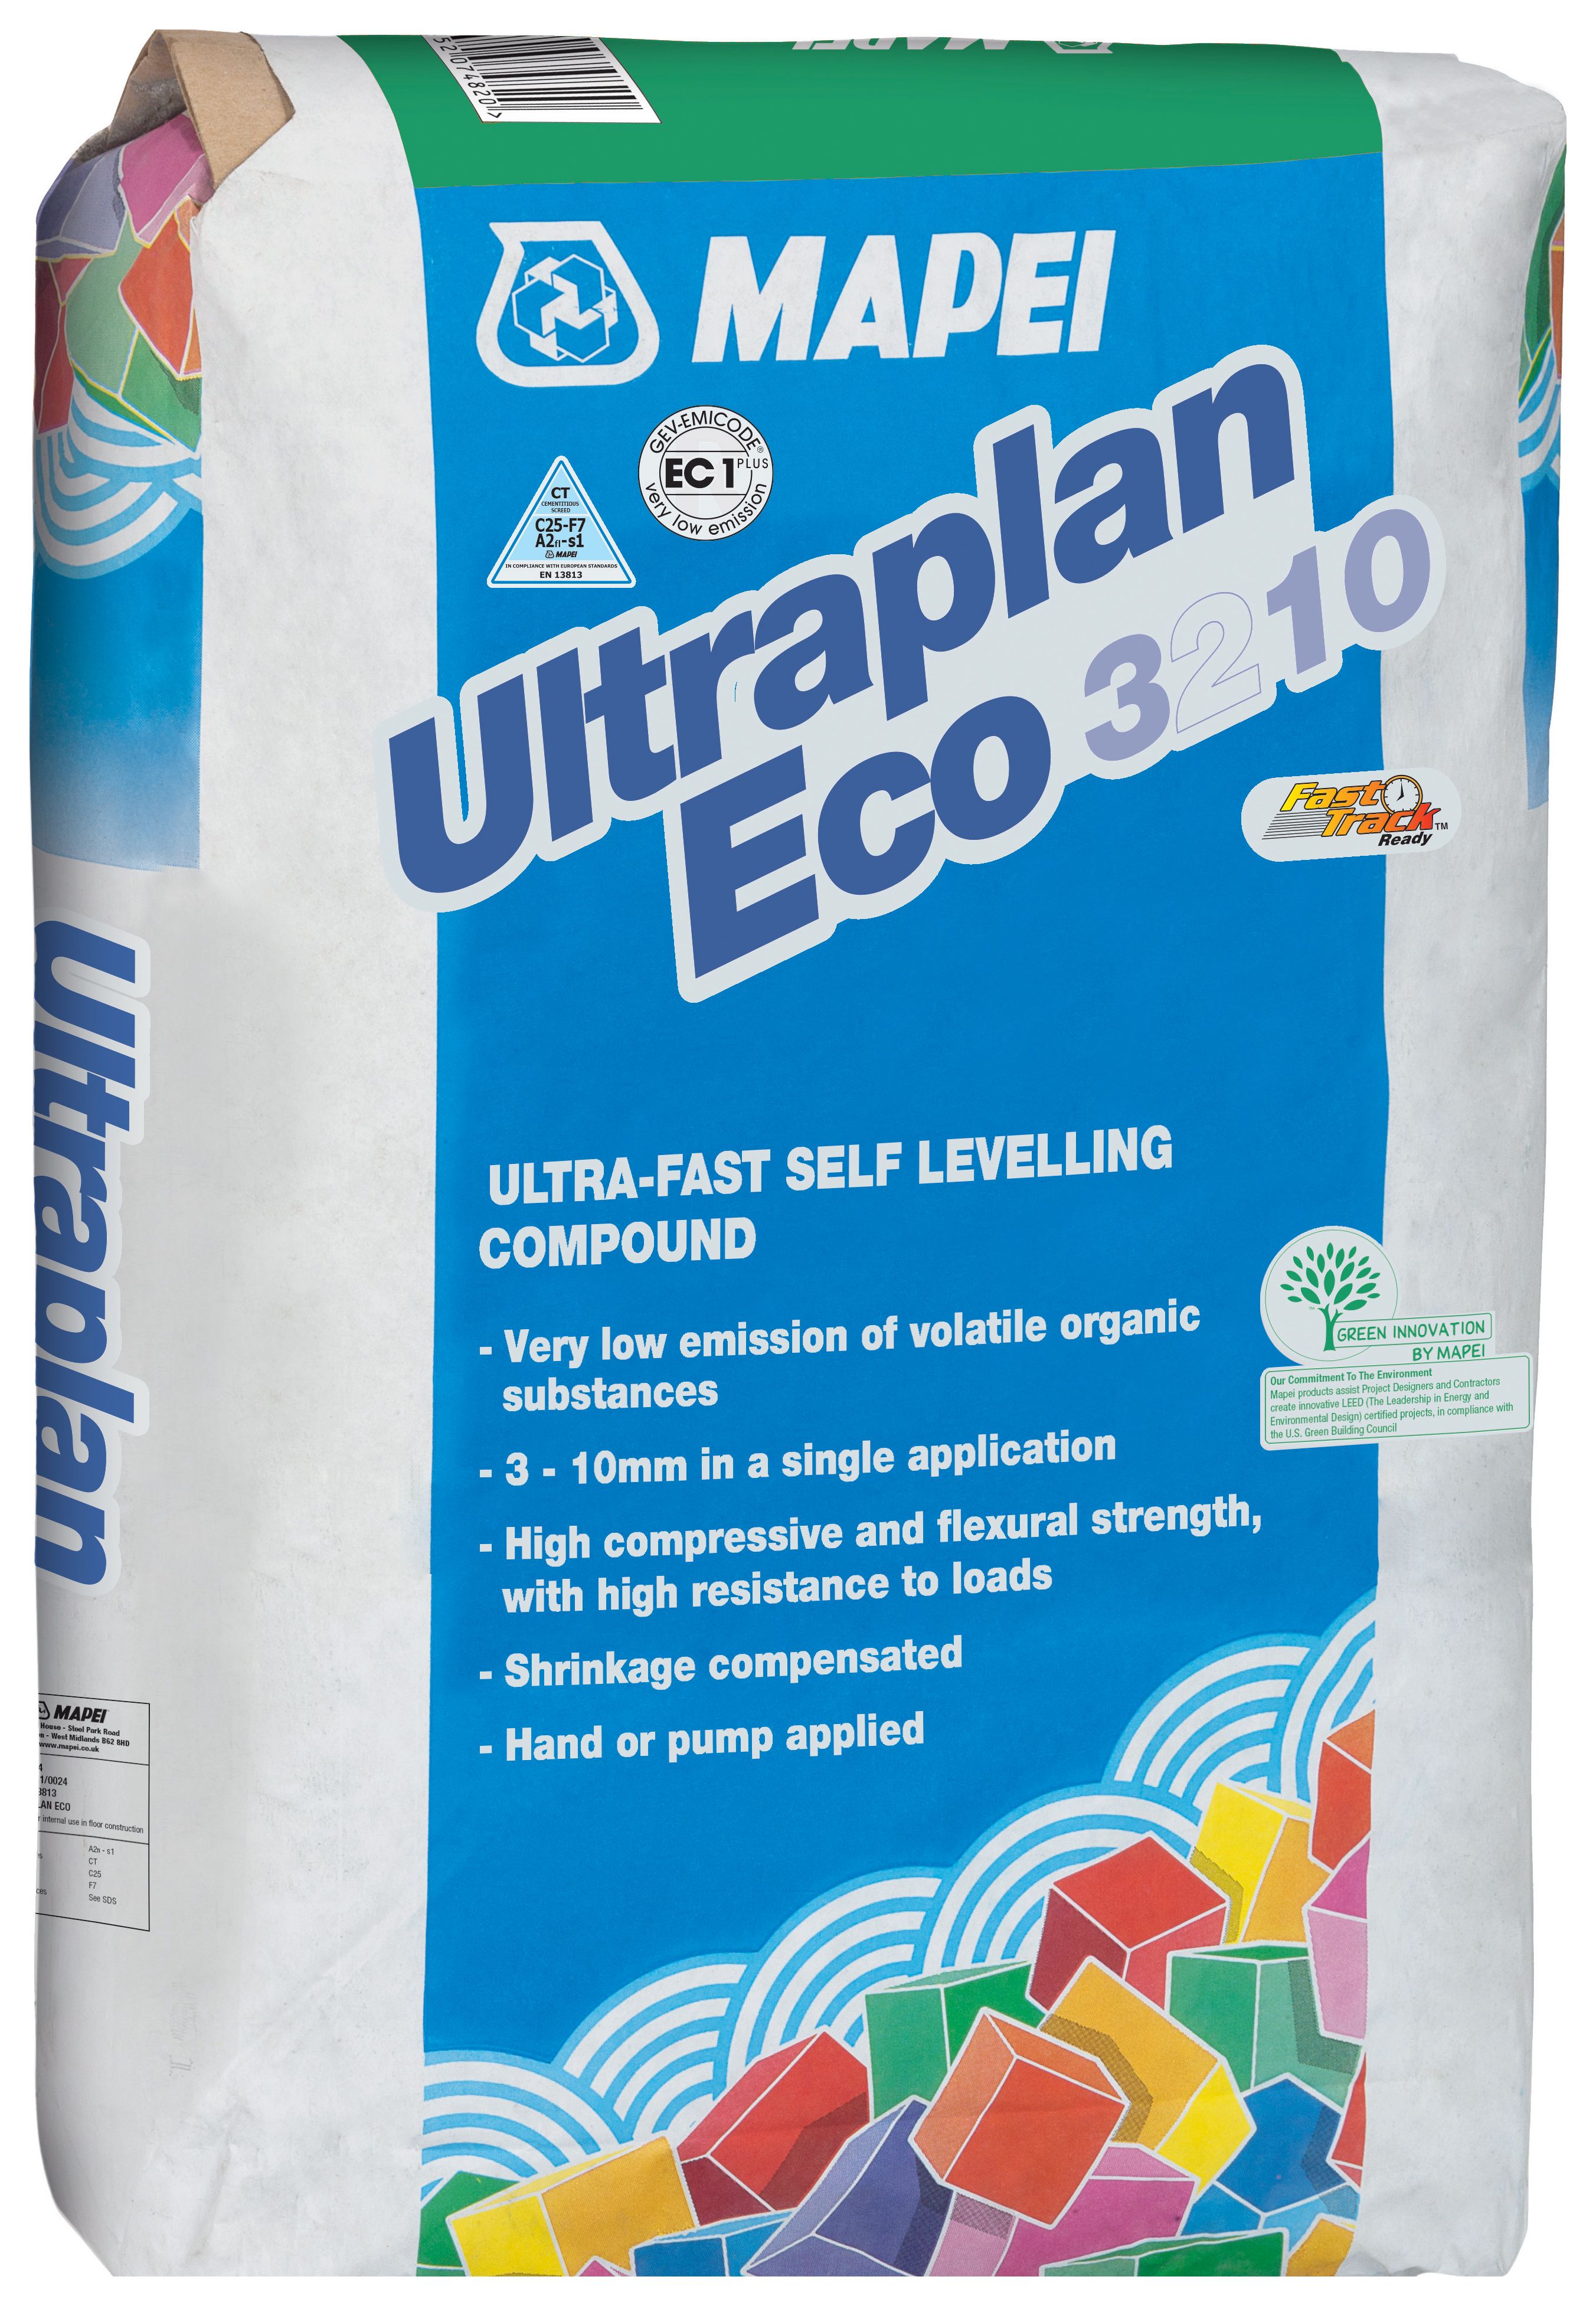 Mapei Ultraplan Eco 3210 Levelling compound 20kg